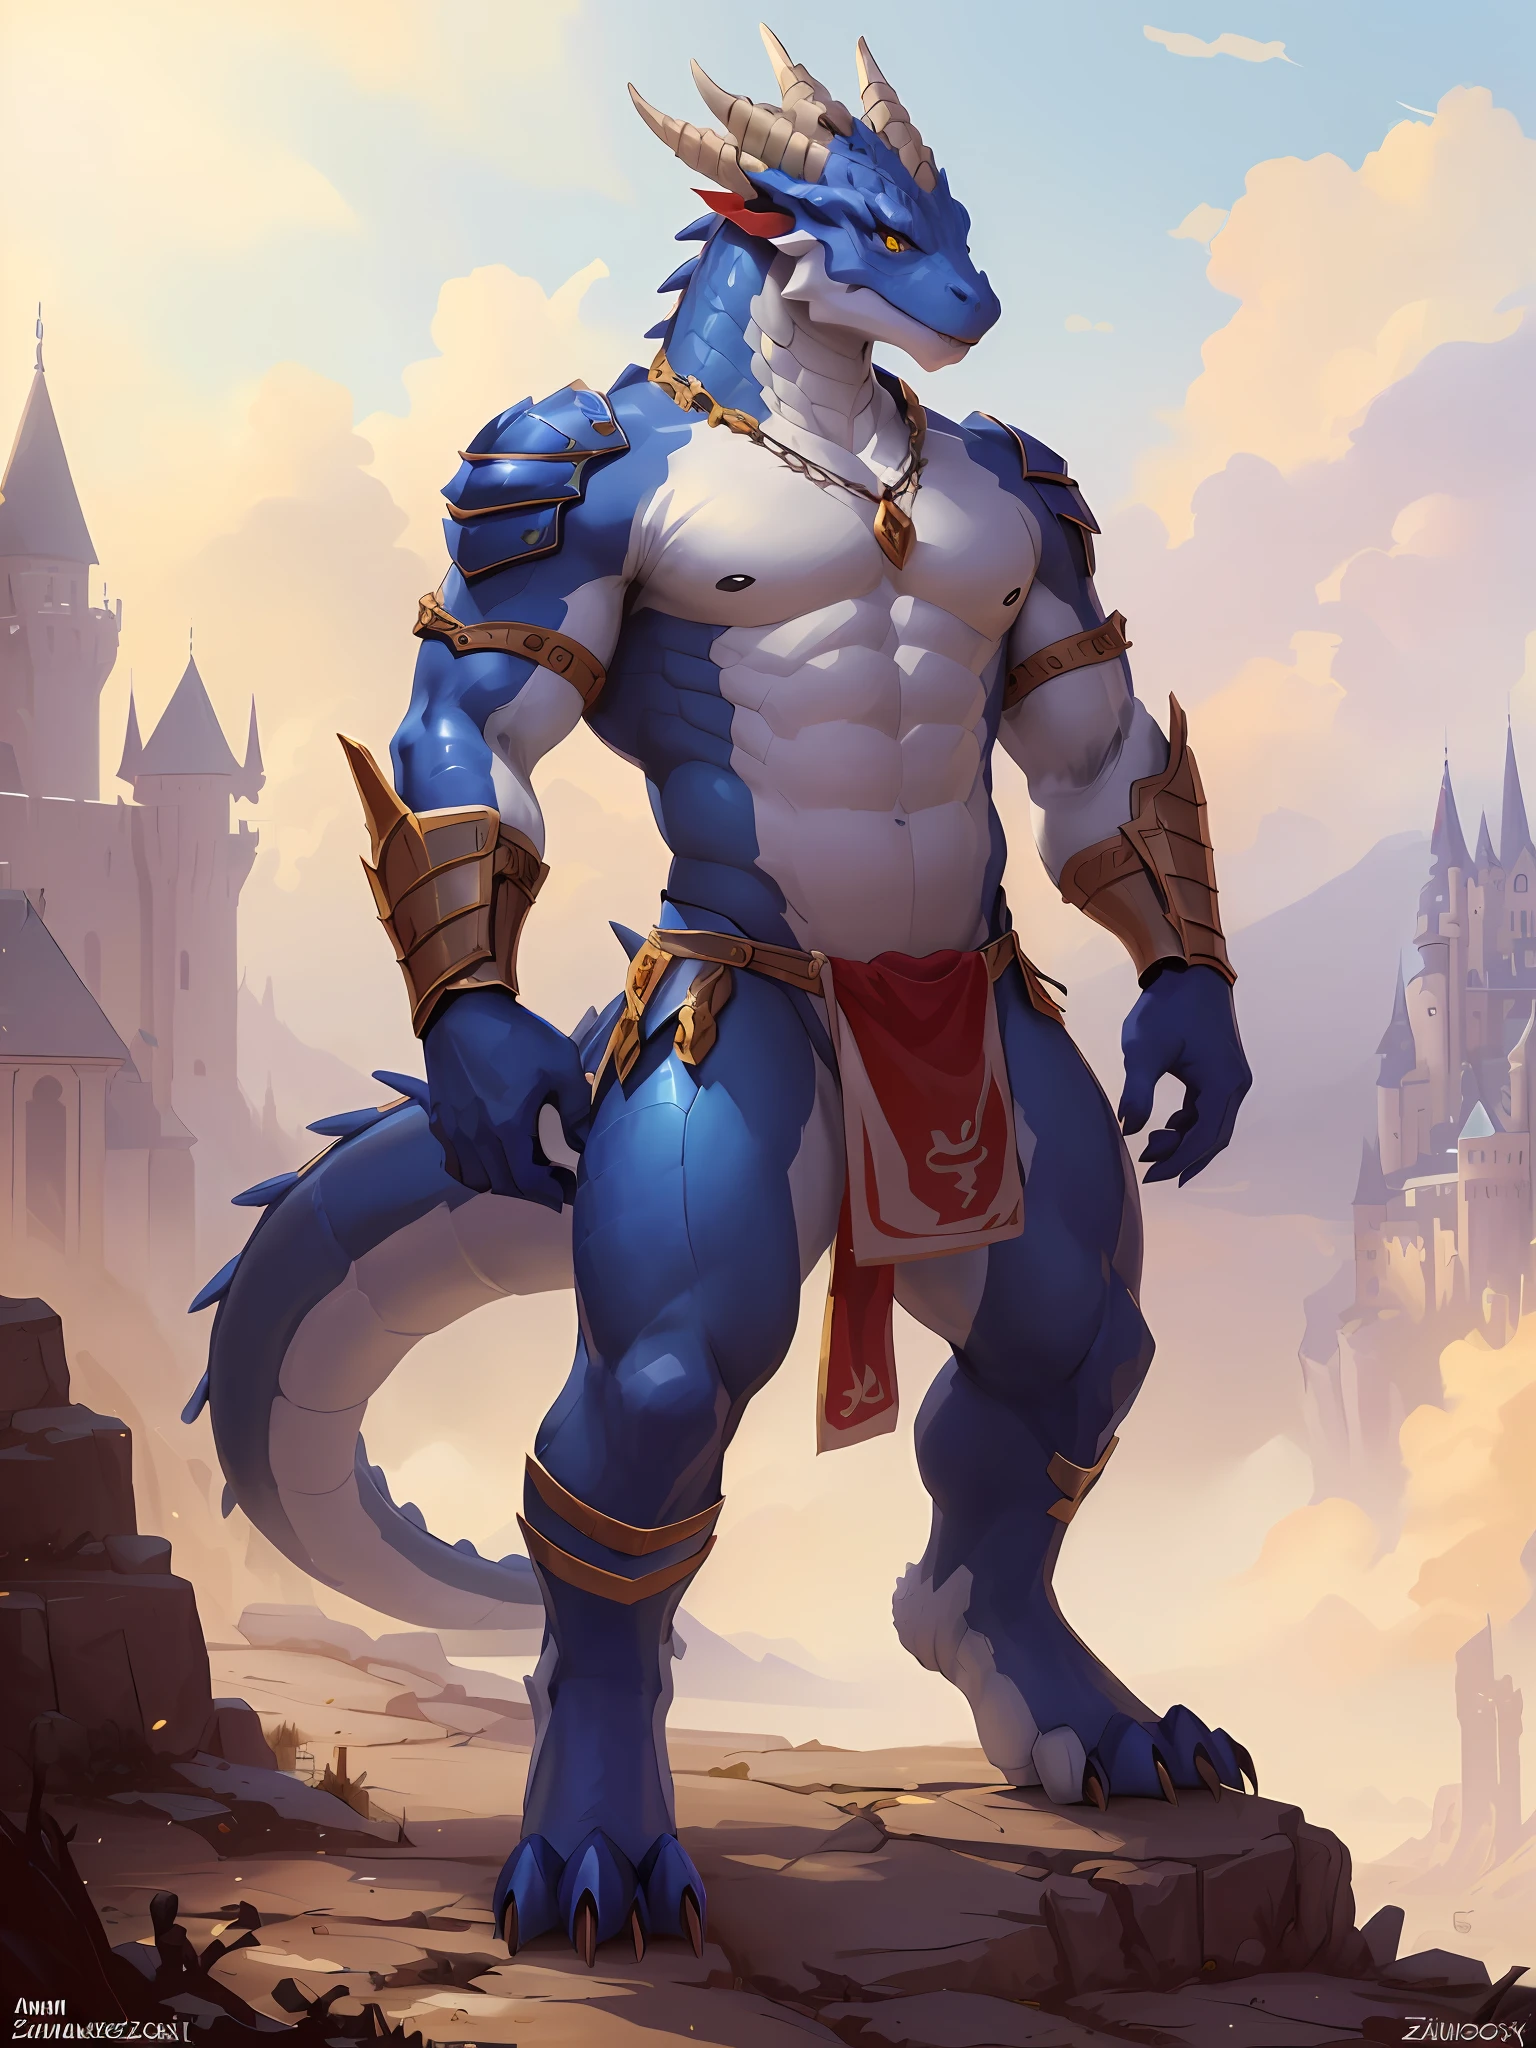 a close up of a cartoon character of a dragon with a castle in the background, anthro dragon art, male robotic anthro dragon, lizardman art, young male anthro dragon, as an anthropomorphic dragon, dragon inspired blue armor, collectible card art, anthro lizard, sfw version, by Adam Marczyński